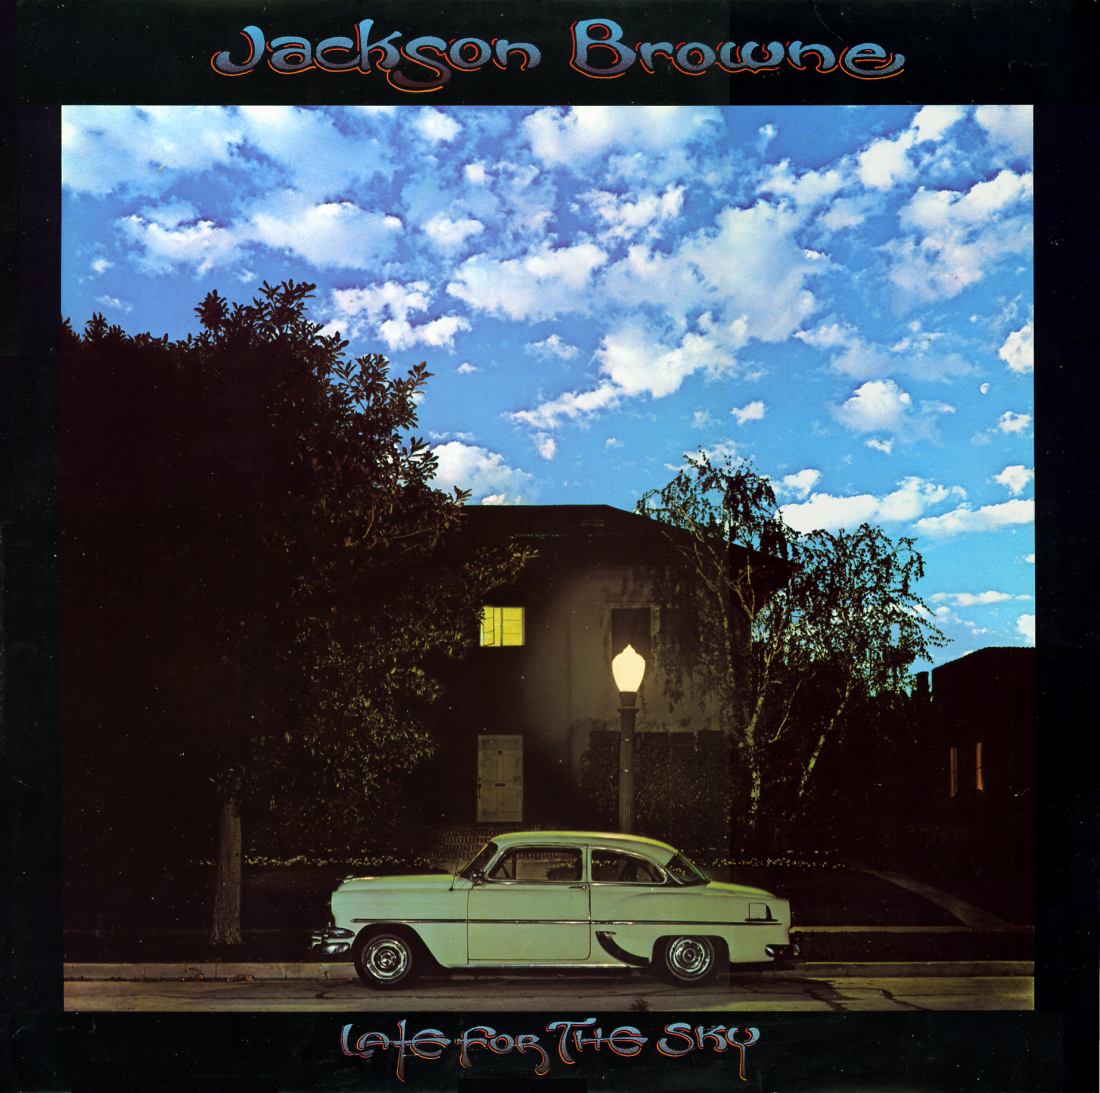 Jackson Browne_Late for the sky_1